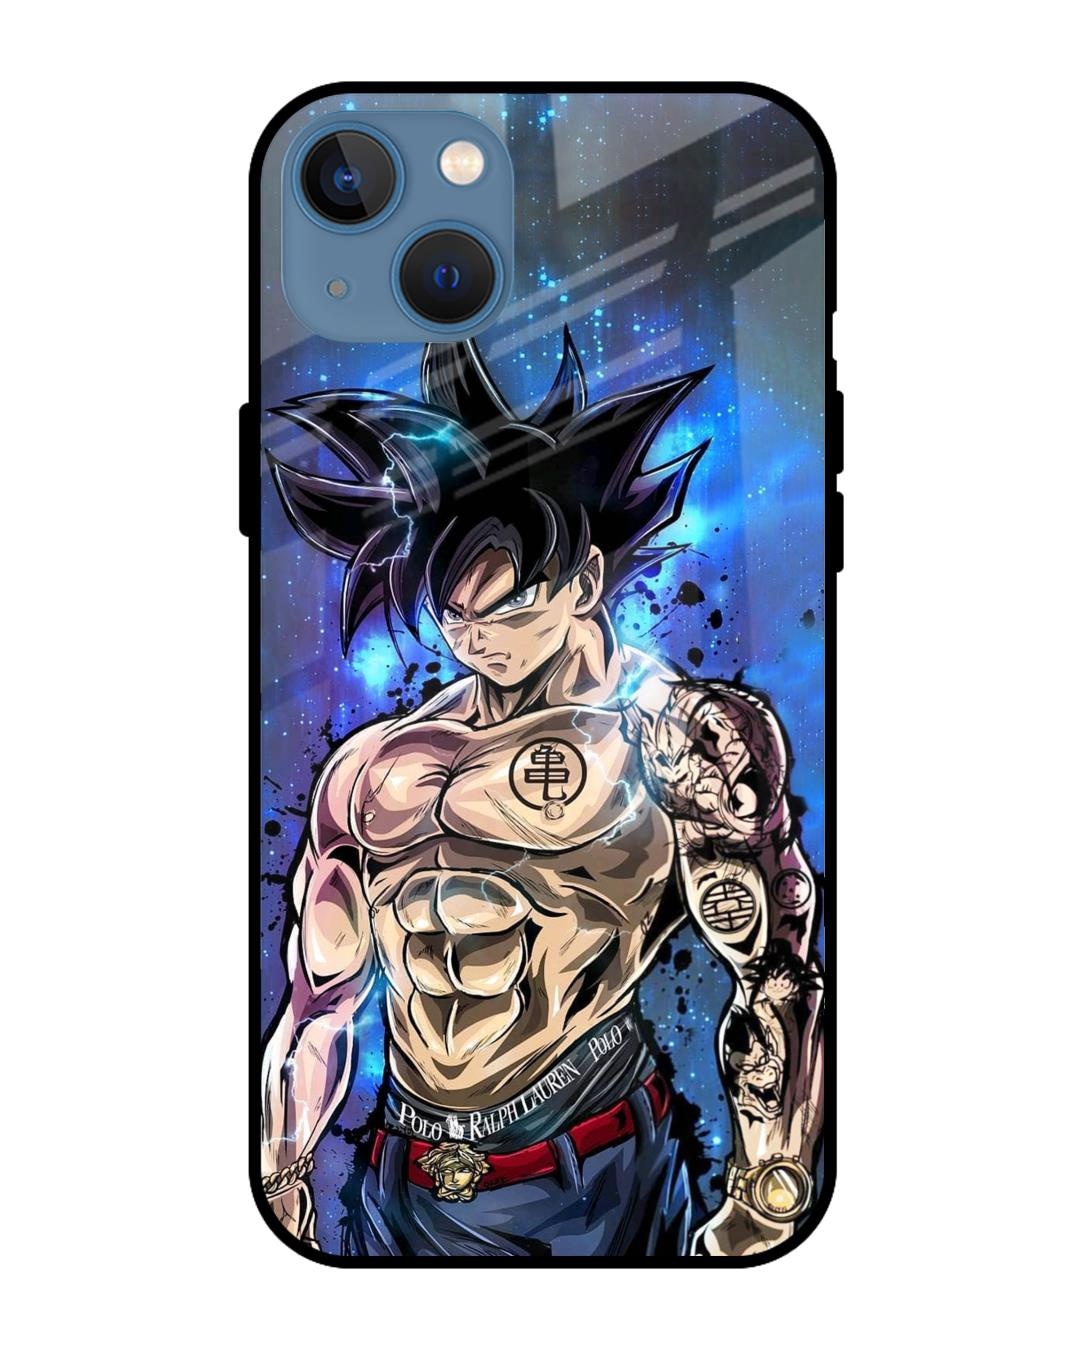 LED Phone Case | Light-Up Anime Cases to Match Your Style-demhanvico.com.vn